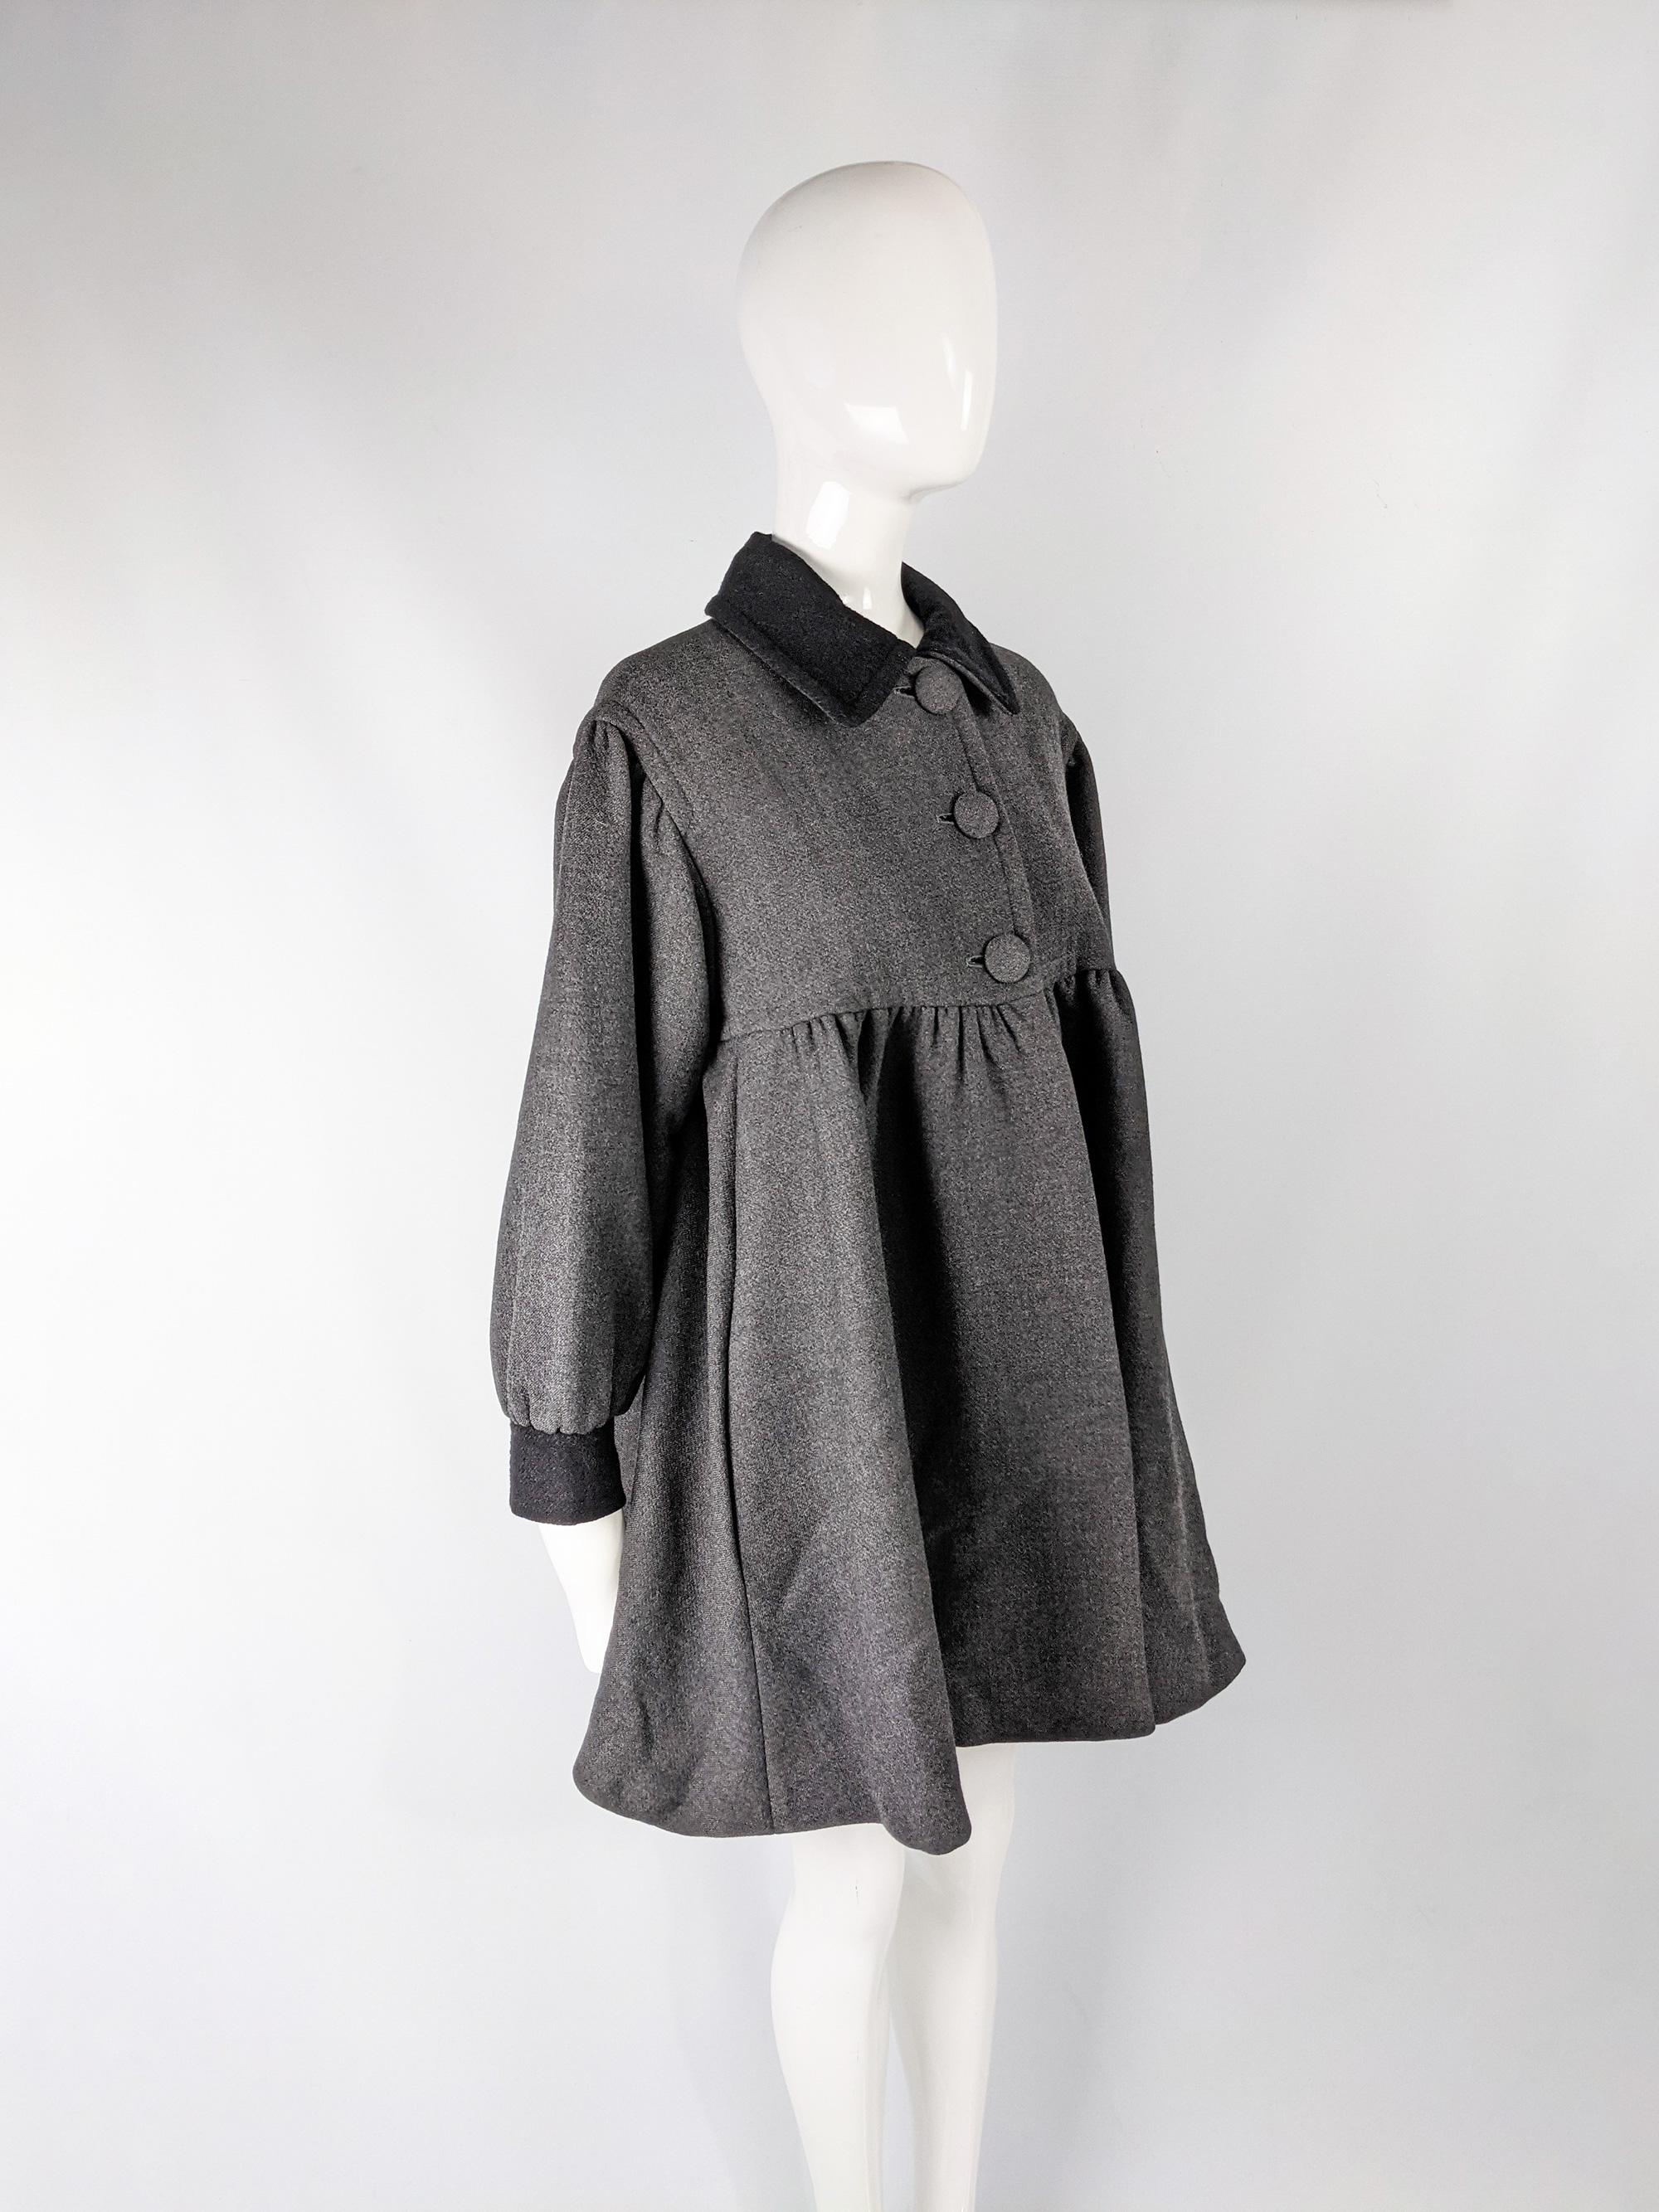 Moschino Vintage Wool Coat In Excellent Condition For Sale In Doncaster, South Yorkshire